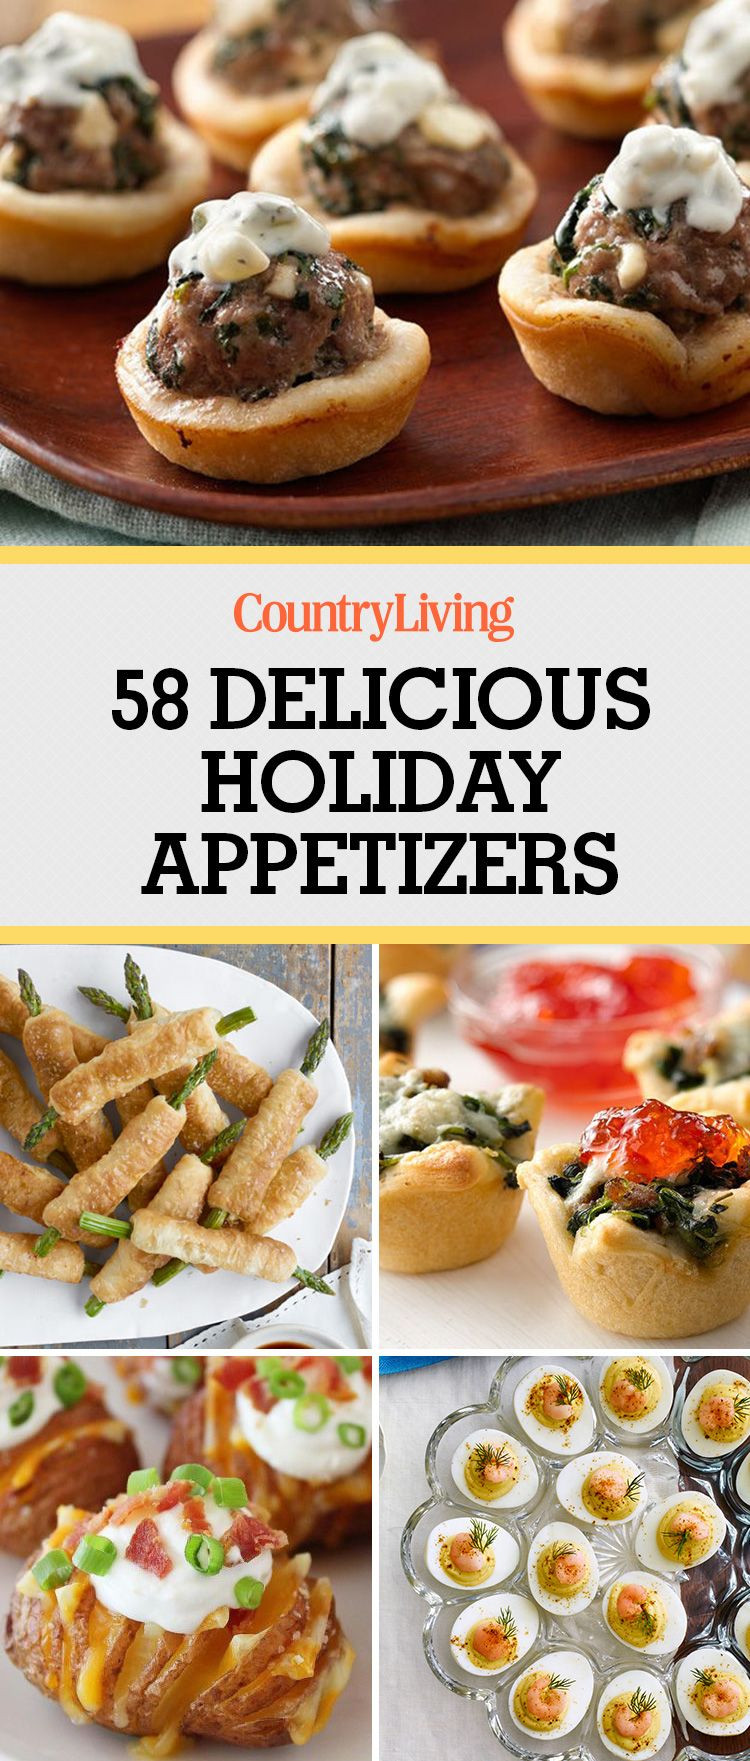 Christmas Appetizers Pinterest
 75 Christmas Appetizers to Please Every Holiday Guest